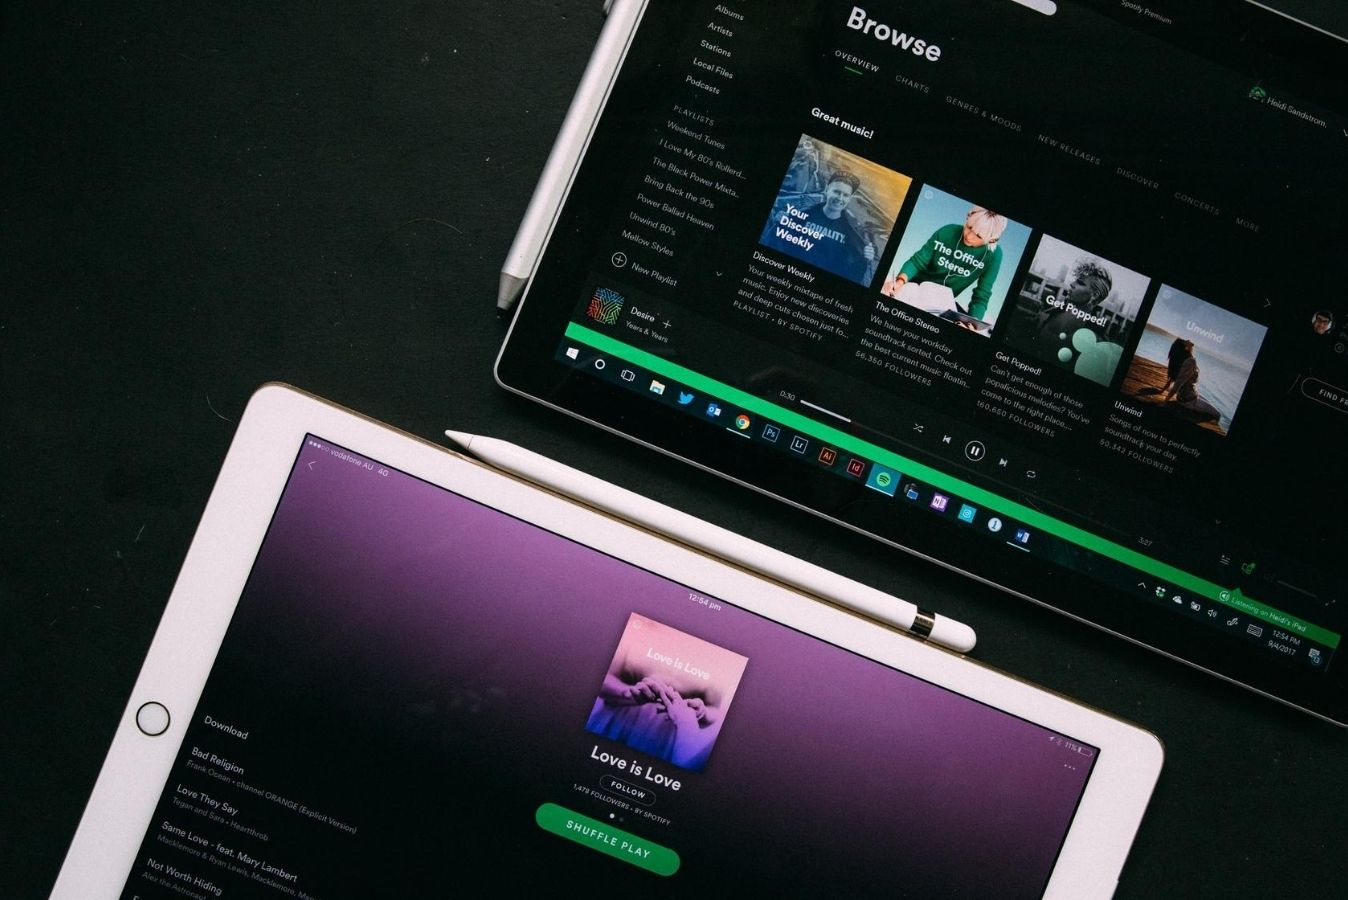 Spotify Web Player Not Working? Here Are 6 Troubleshooting Tips to Try